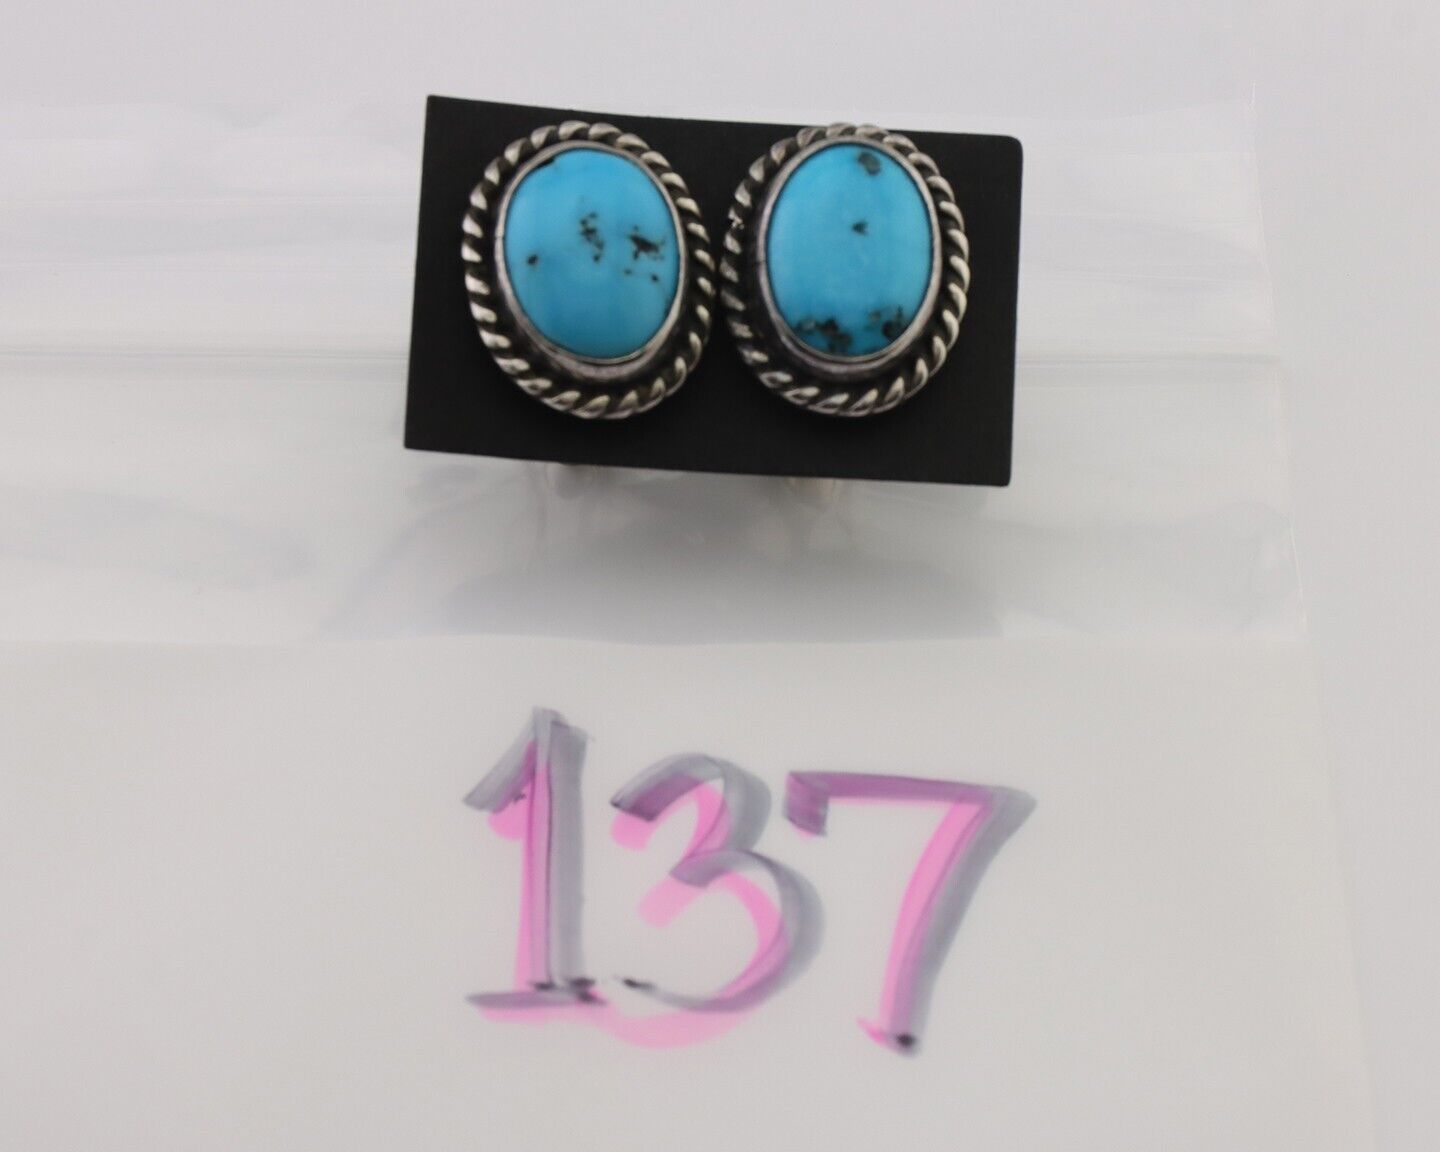 Navajo Cufflinks 925 Silver Native American Natural Turquoise C.80's